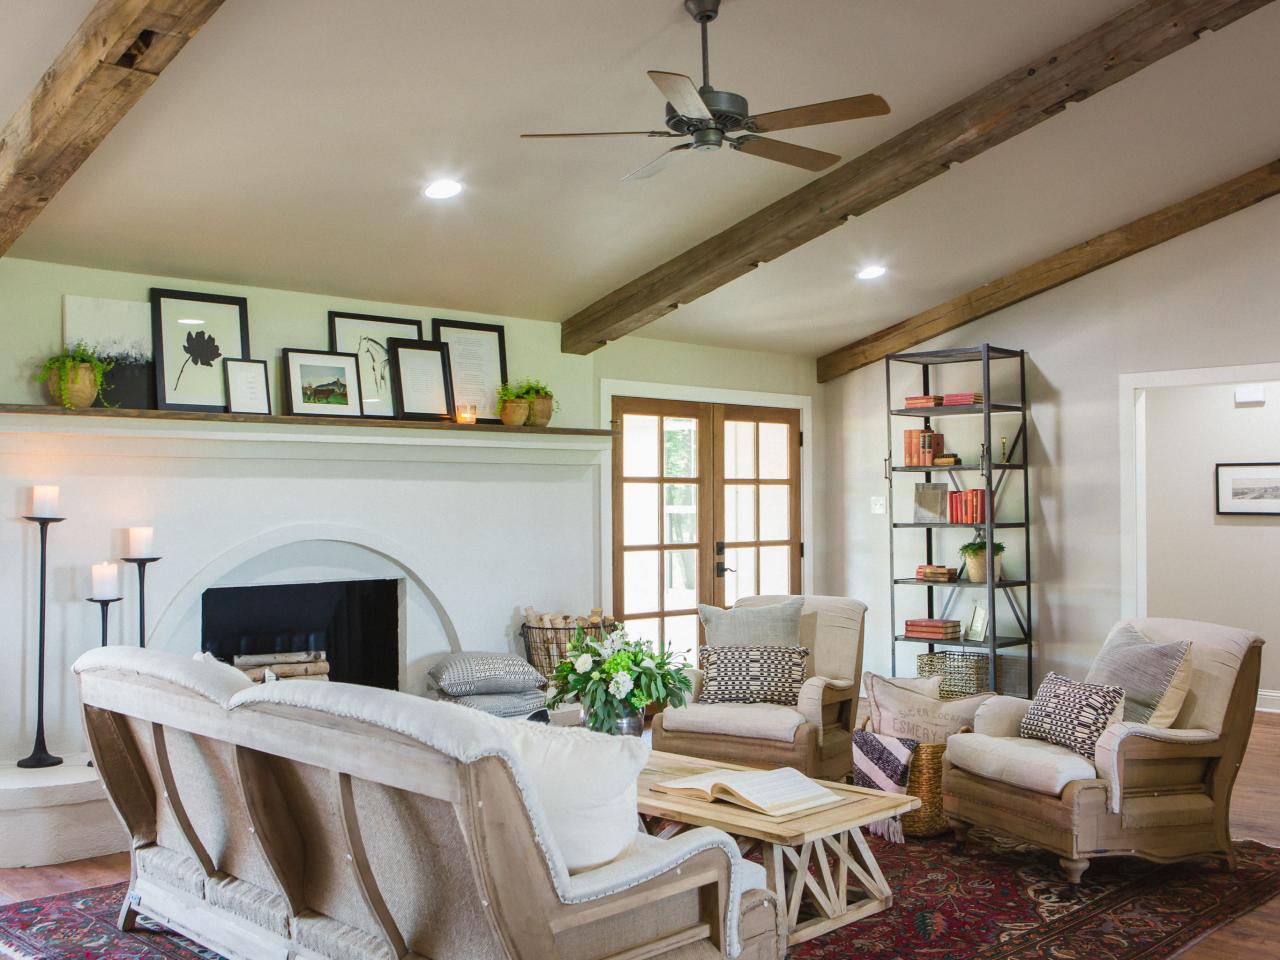 Exposed beams in a home on HGTV's 'Fixer Upper'